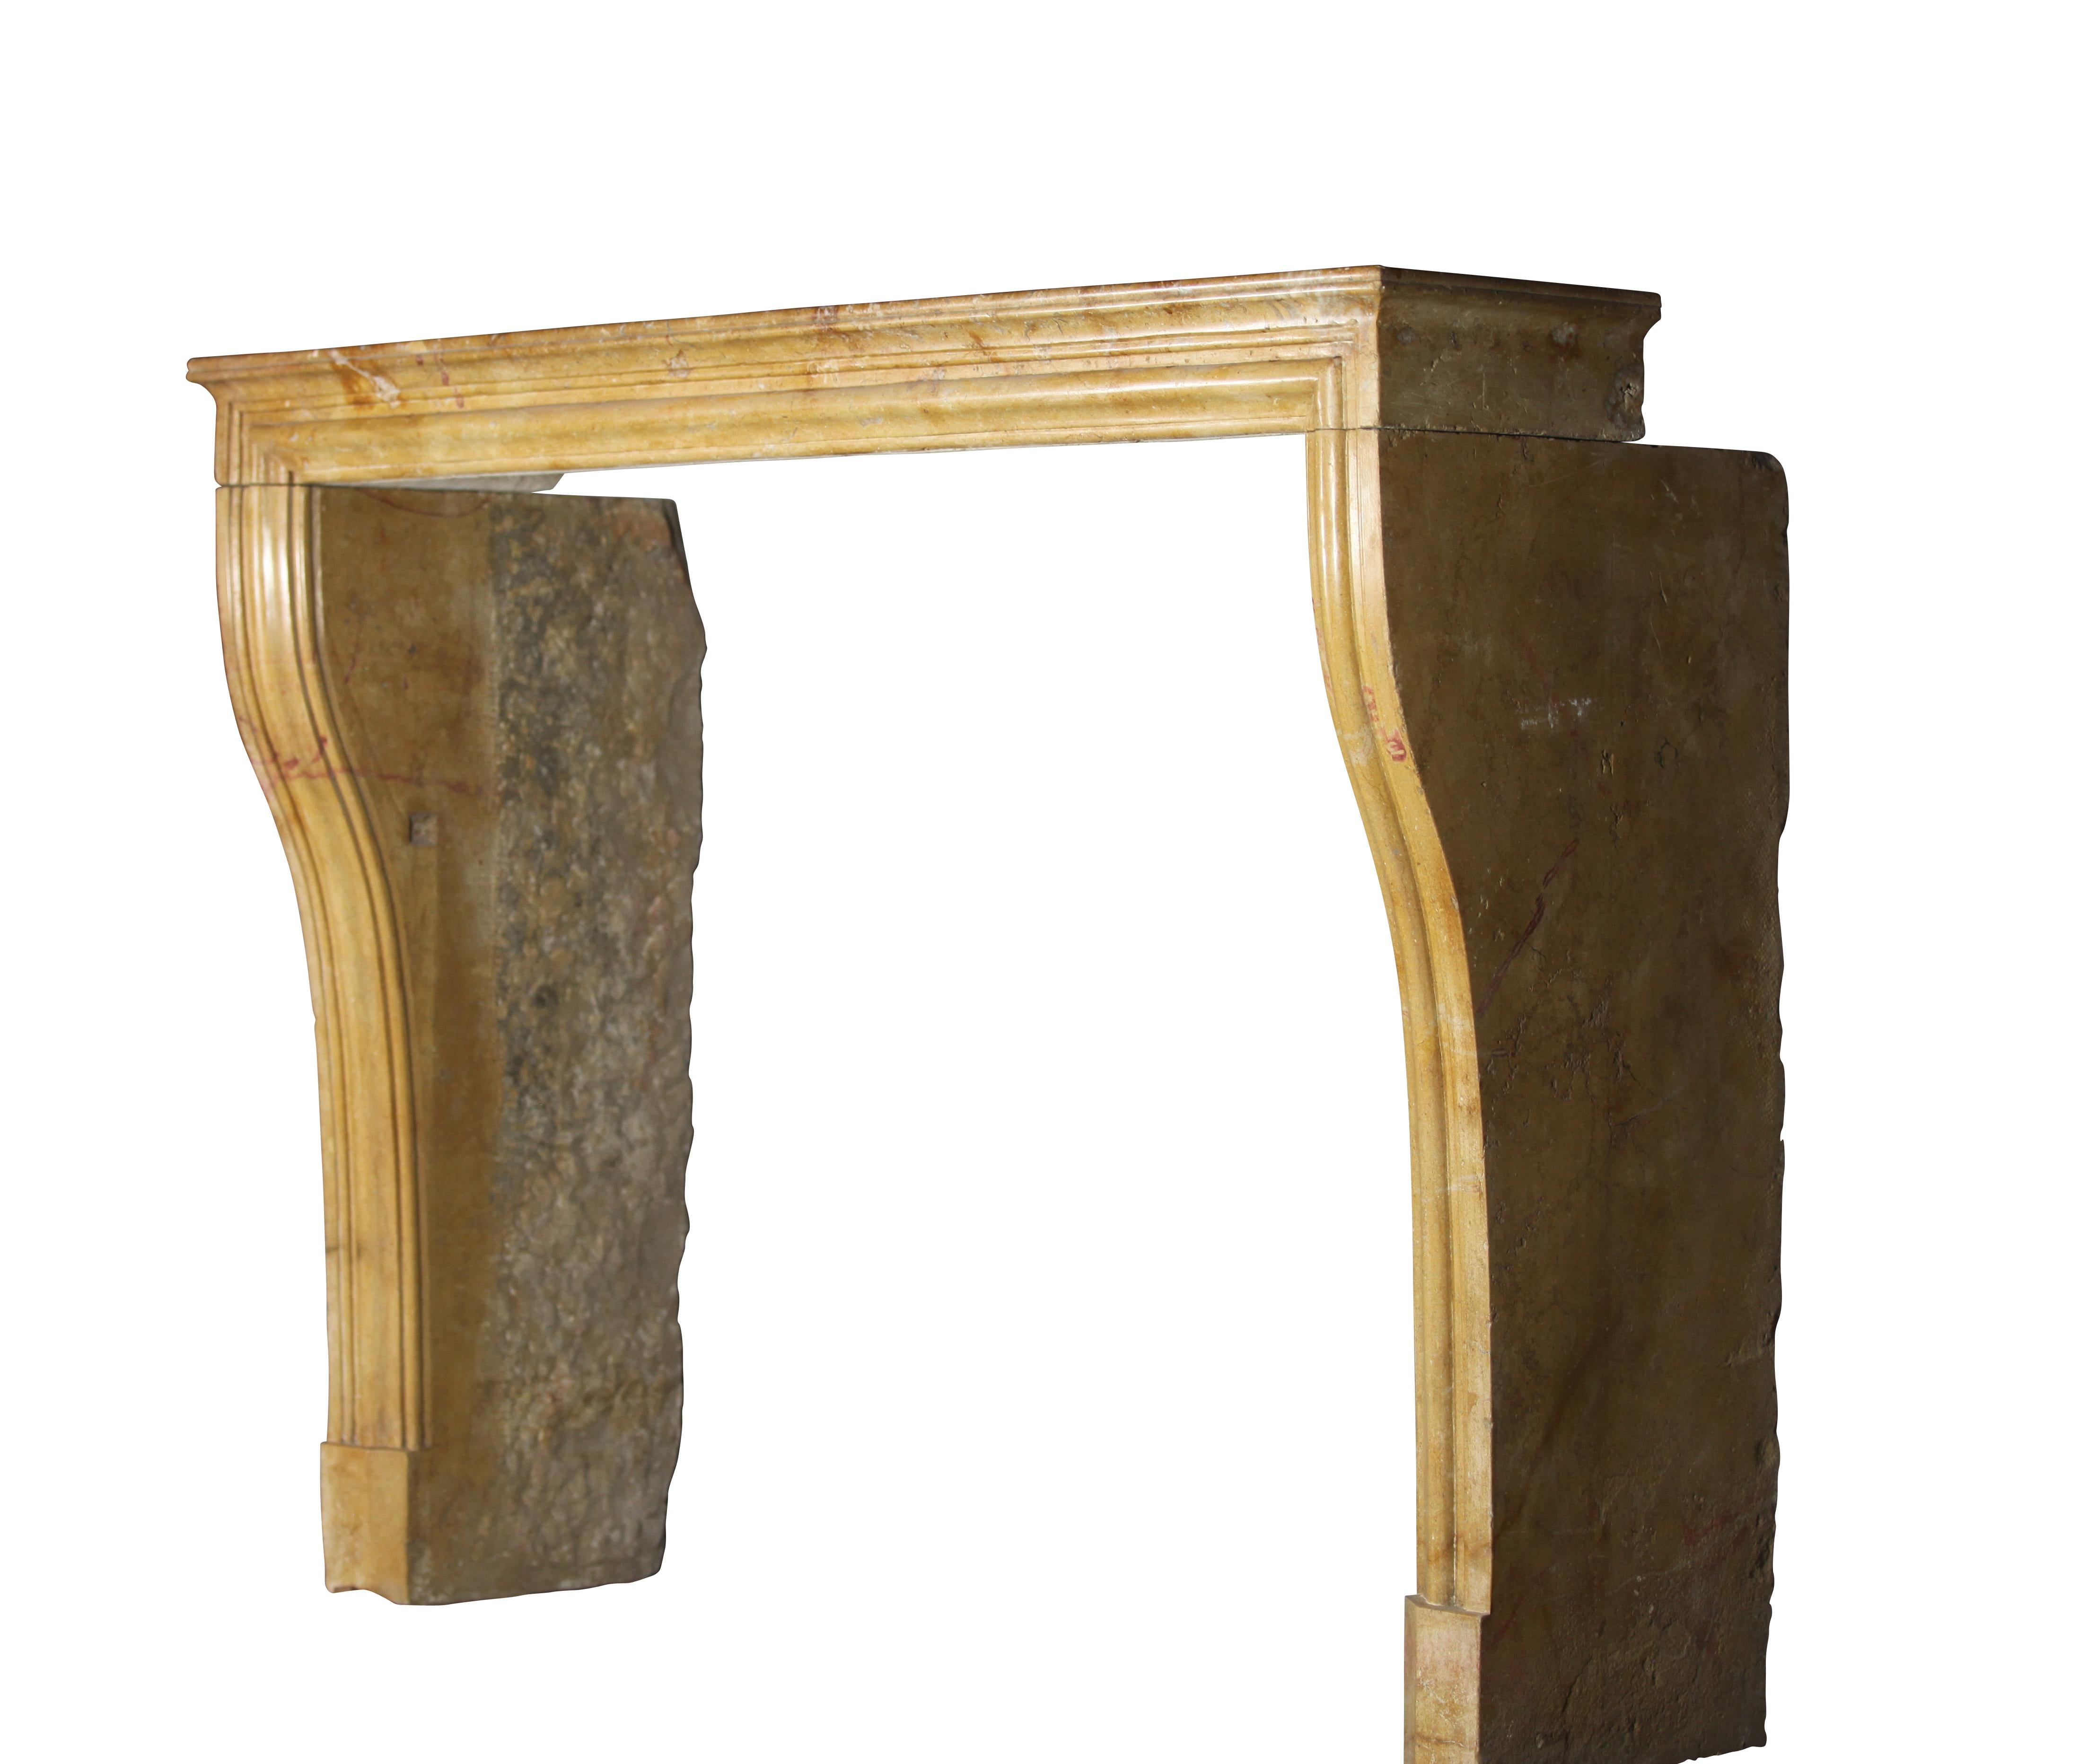 This is a nicely waxed original French antique fireplace surround in a Louis XIV style of the 19th century. The hard stone/marble has red and honey color veining and from the village Corton. Corton is a small village near Medieval city of